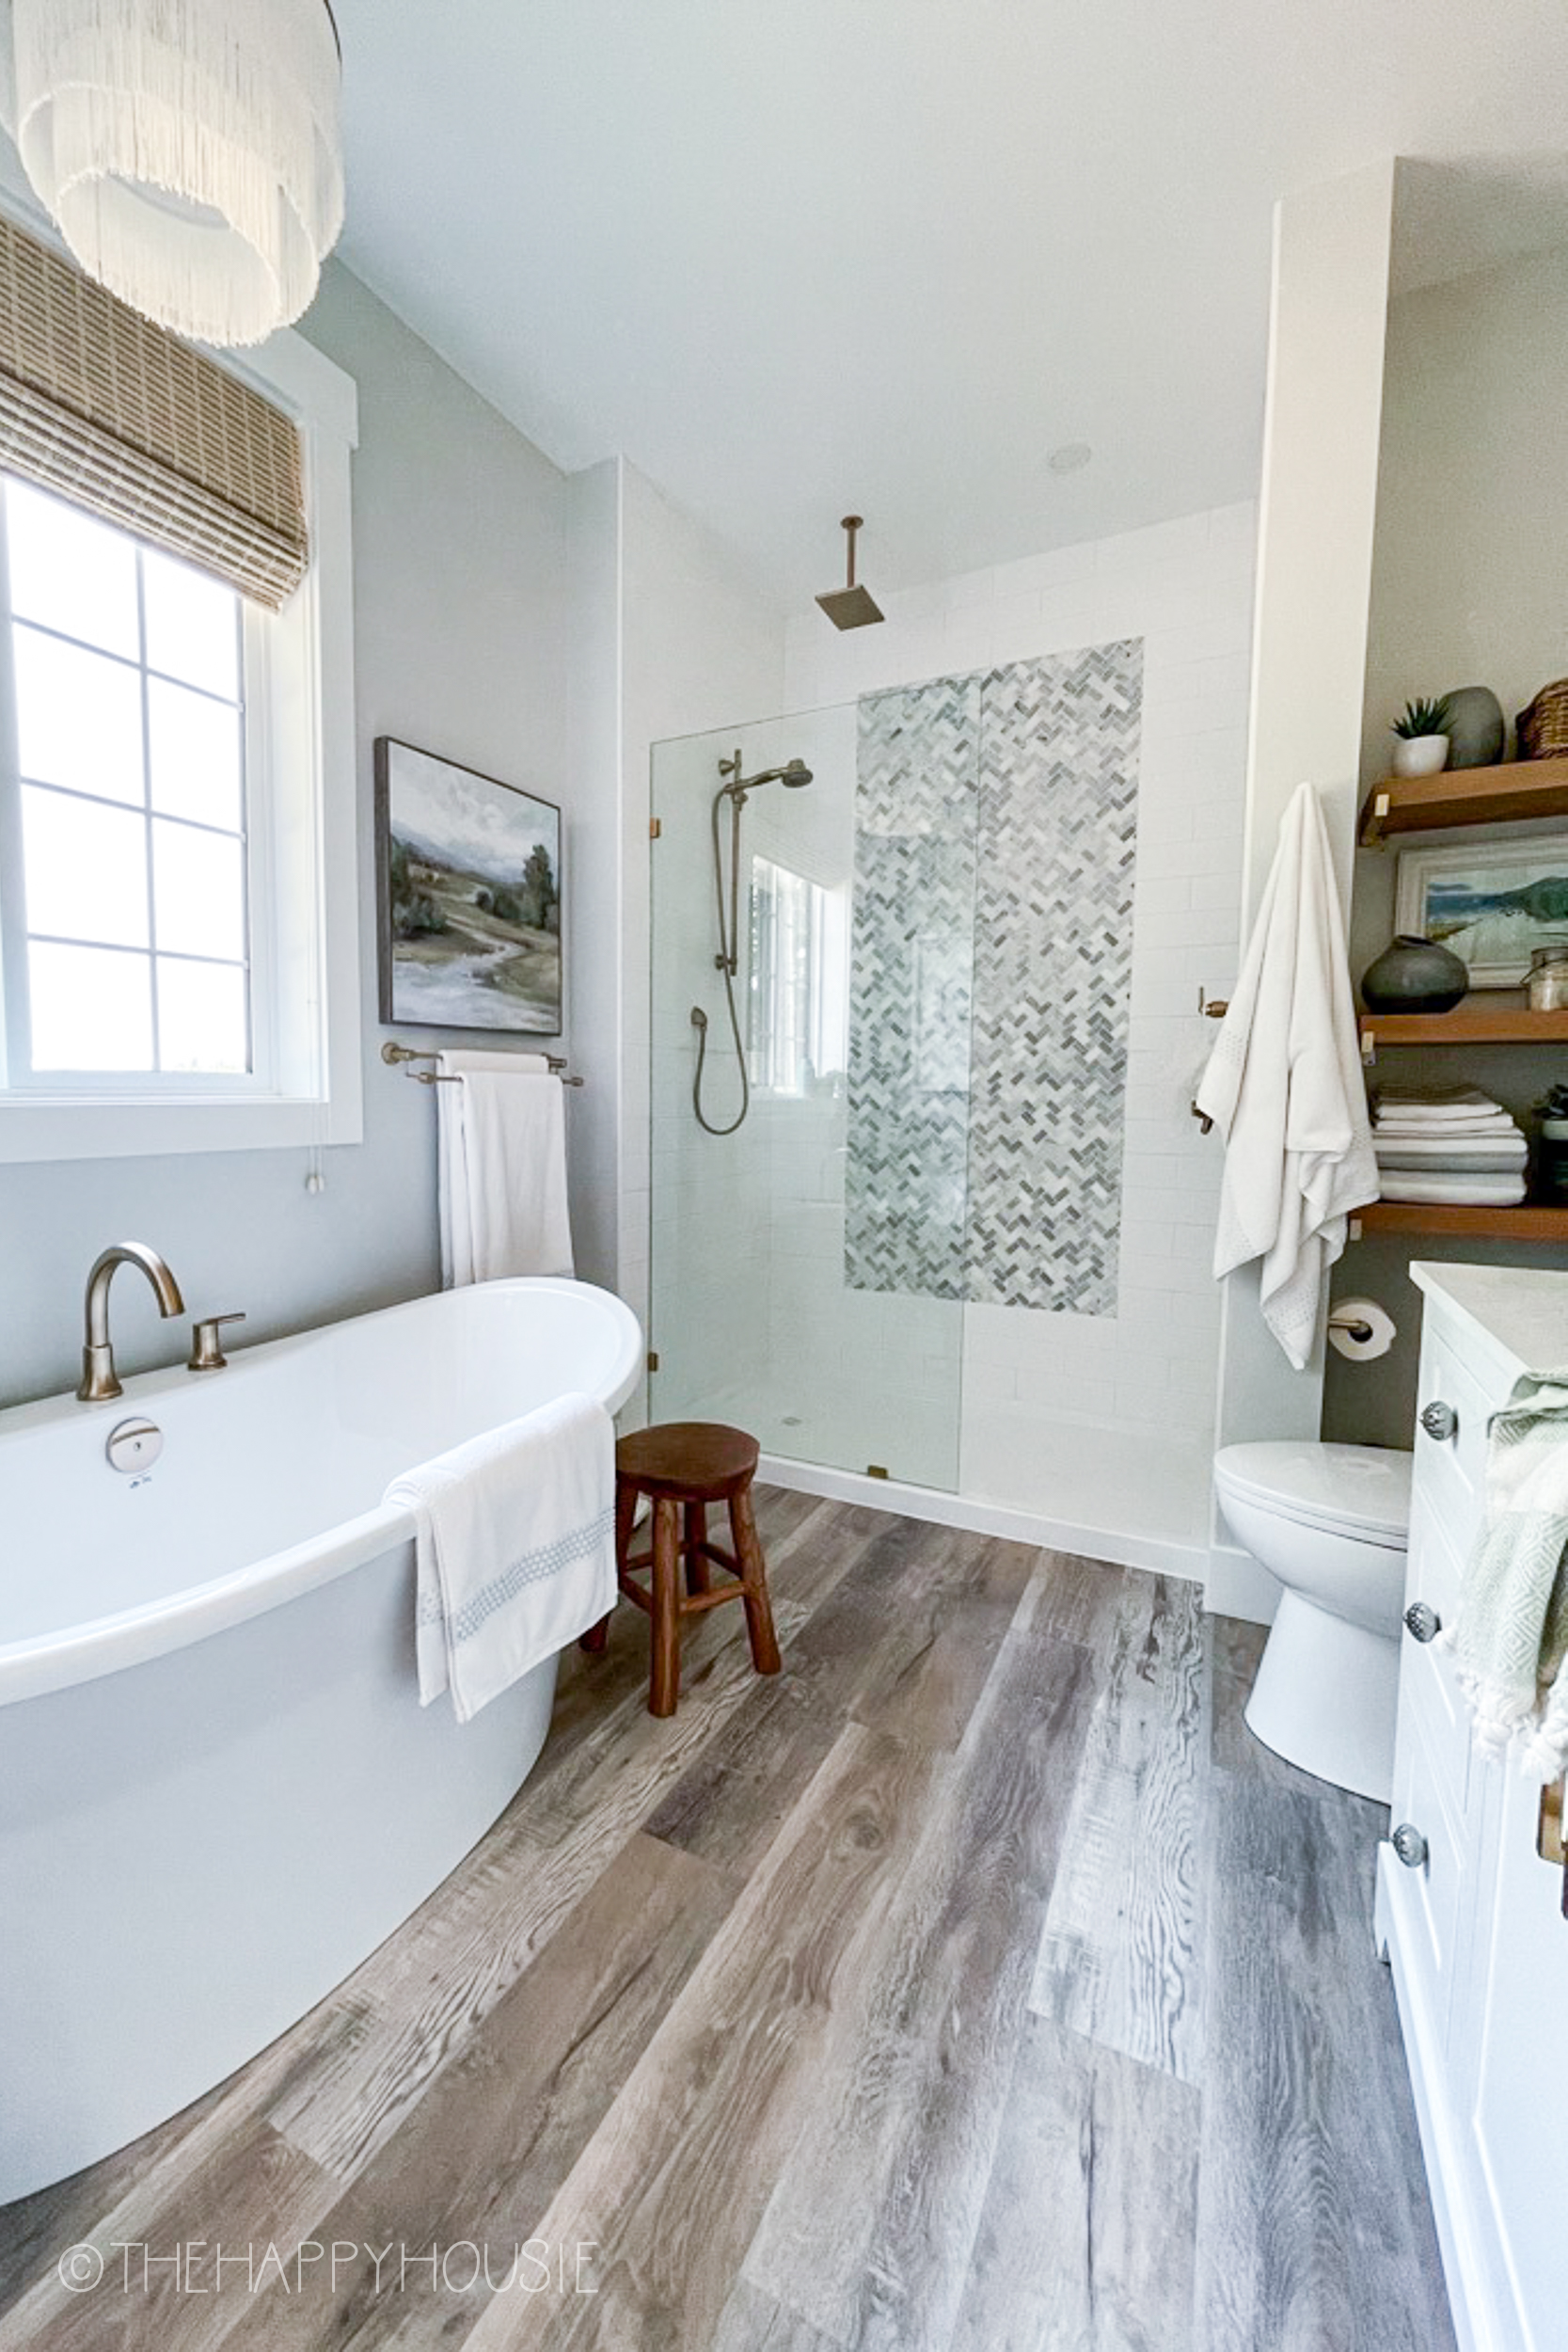 A fresh modern bathroom with a separate tub and shower and vinyl plank floors